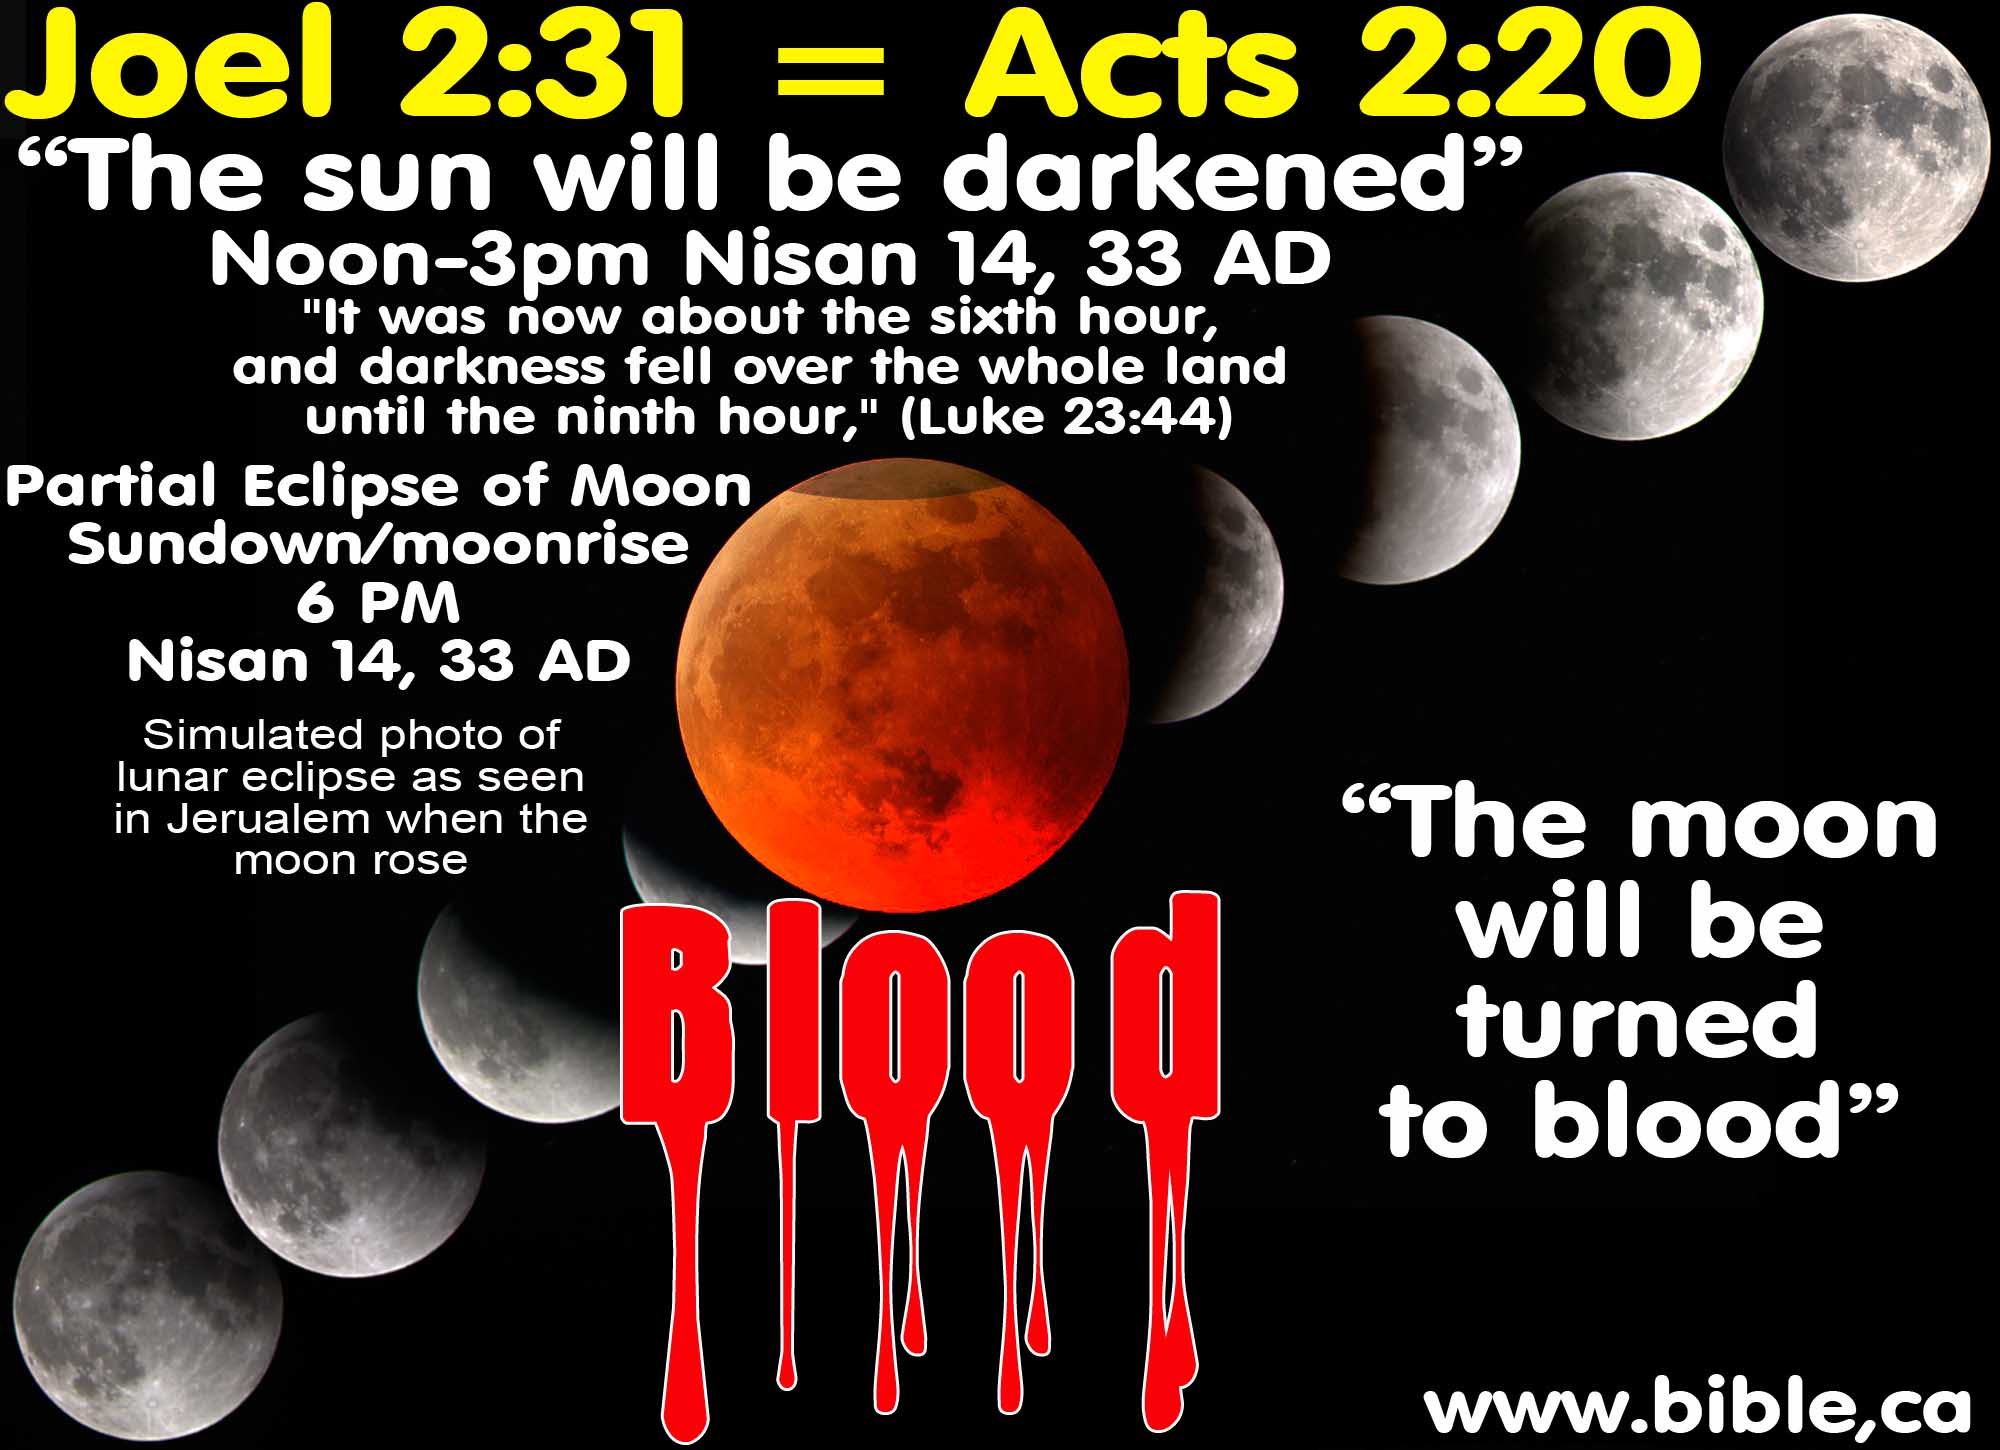 Lunar Eclipses at birth and death of Christ: 1 BC and 3 April AD 33